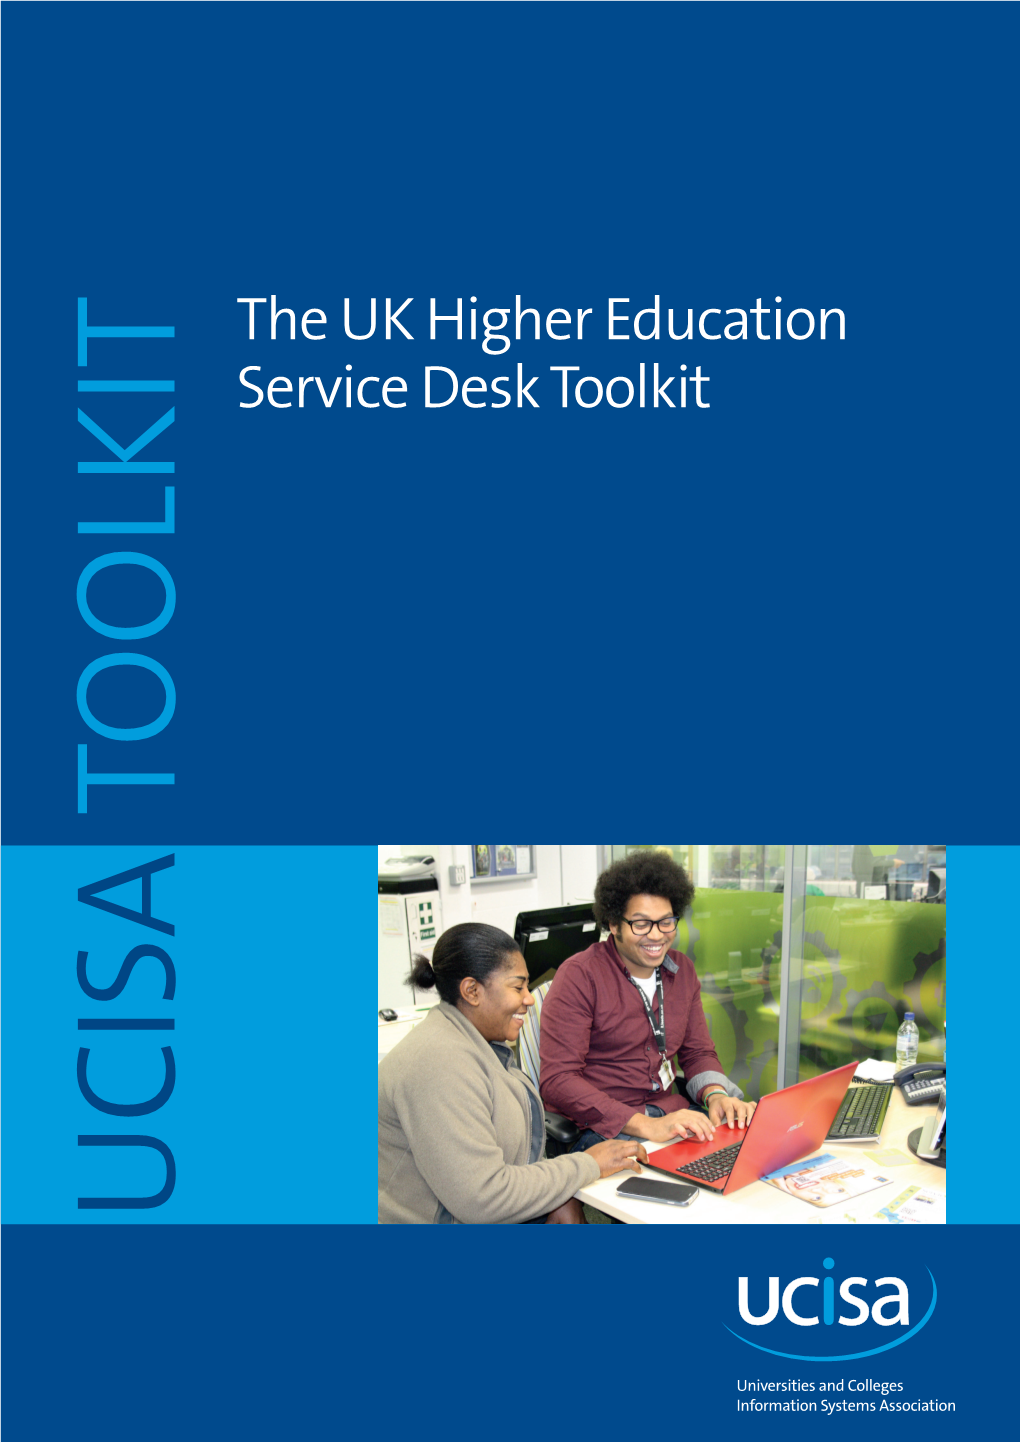 THE UK HIGHER EDUCATION SERVICE DESK TOOLKIT 2 the UK HIGHER EDUCATION LEARNING SPACE TOOLKIT Contents